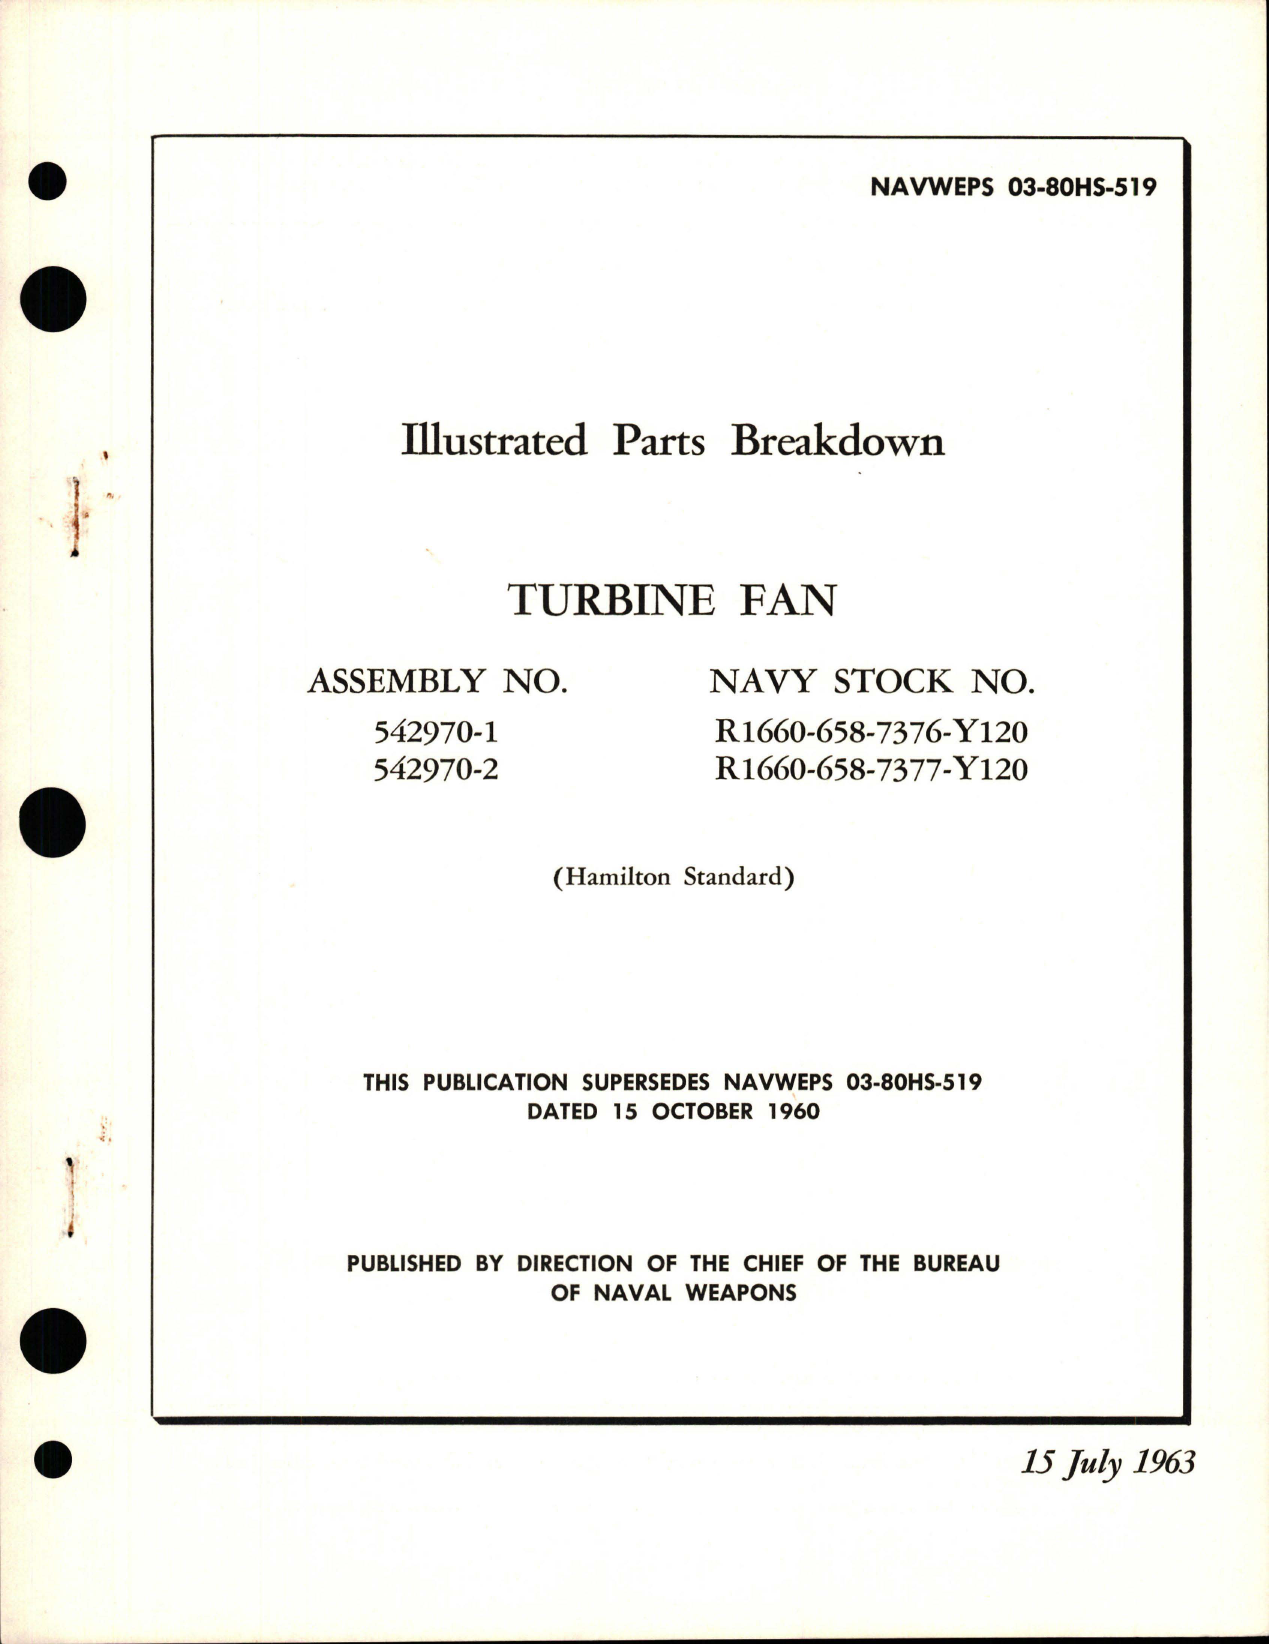 Sample page 1 from AirCorps Library document: Illustrated Parts Breakdown for Turbine Fan - Assemblies 542970-1 and 542970-2 